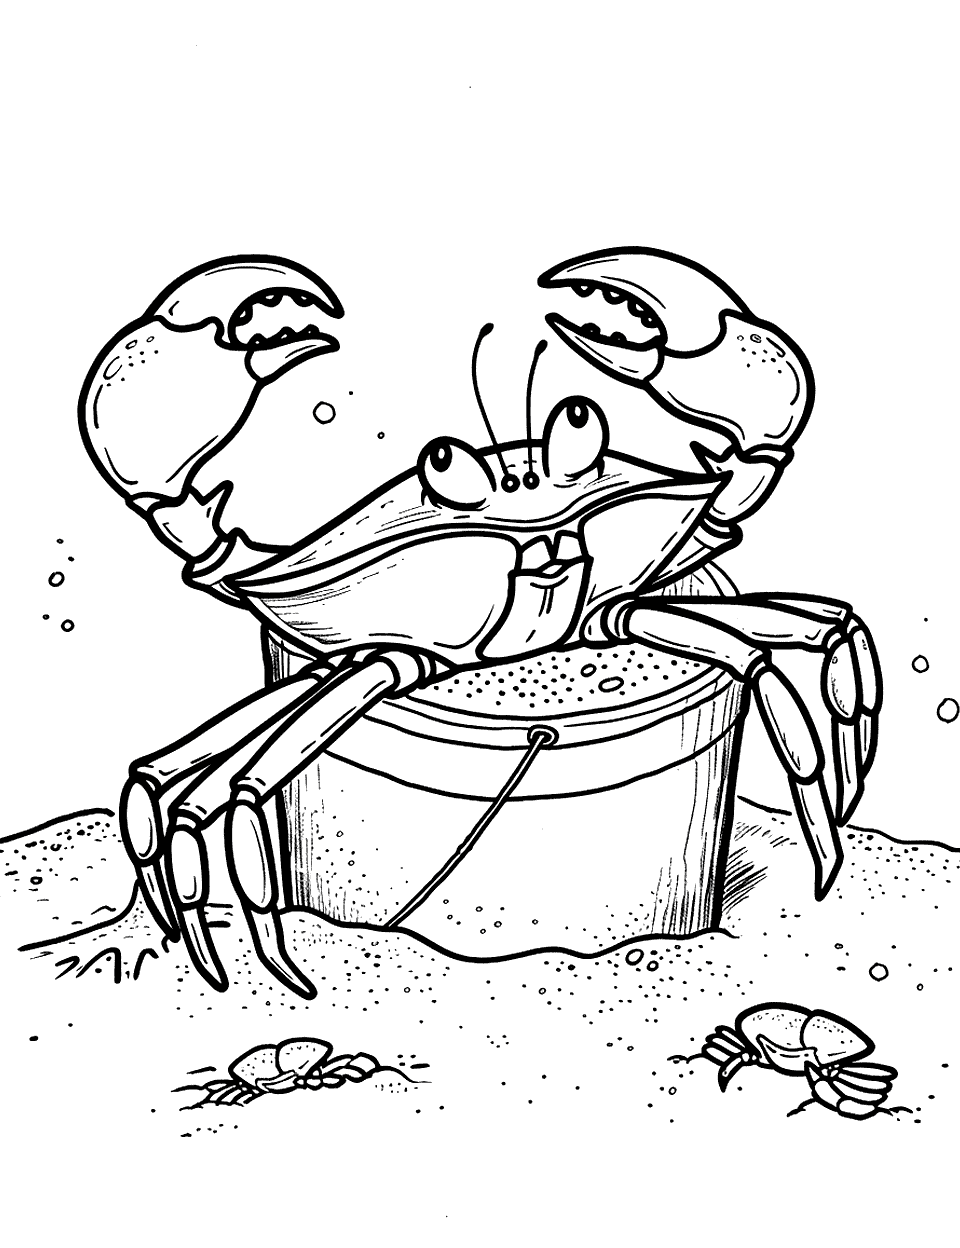 Crab and a Bucket Coloring Page - A playful scene with a crab peeking out from a beach bucket.